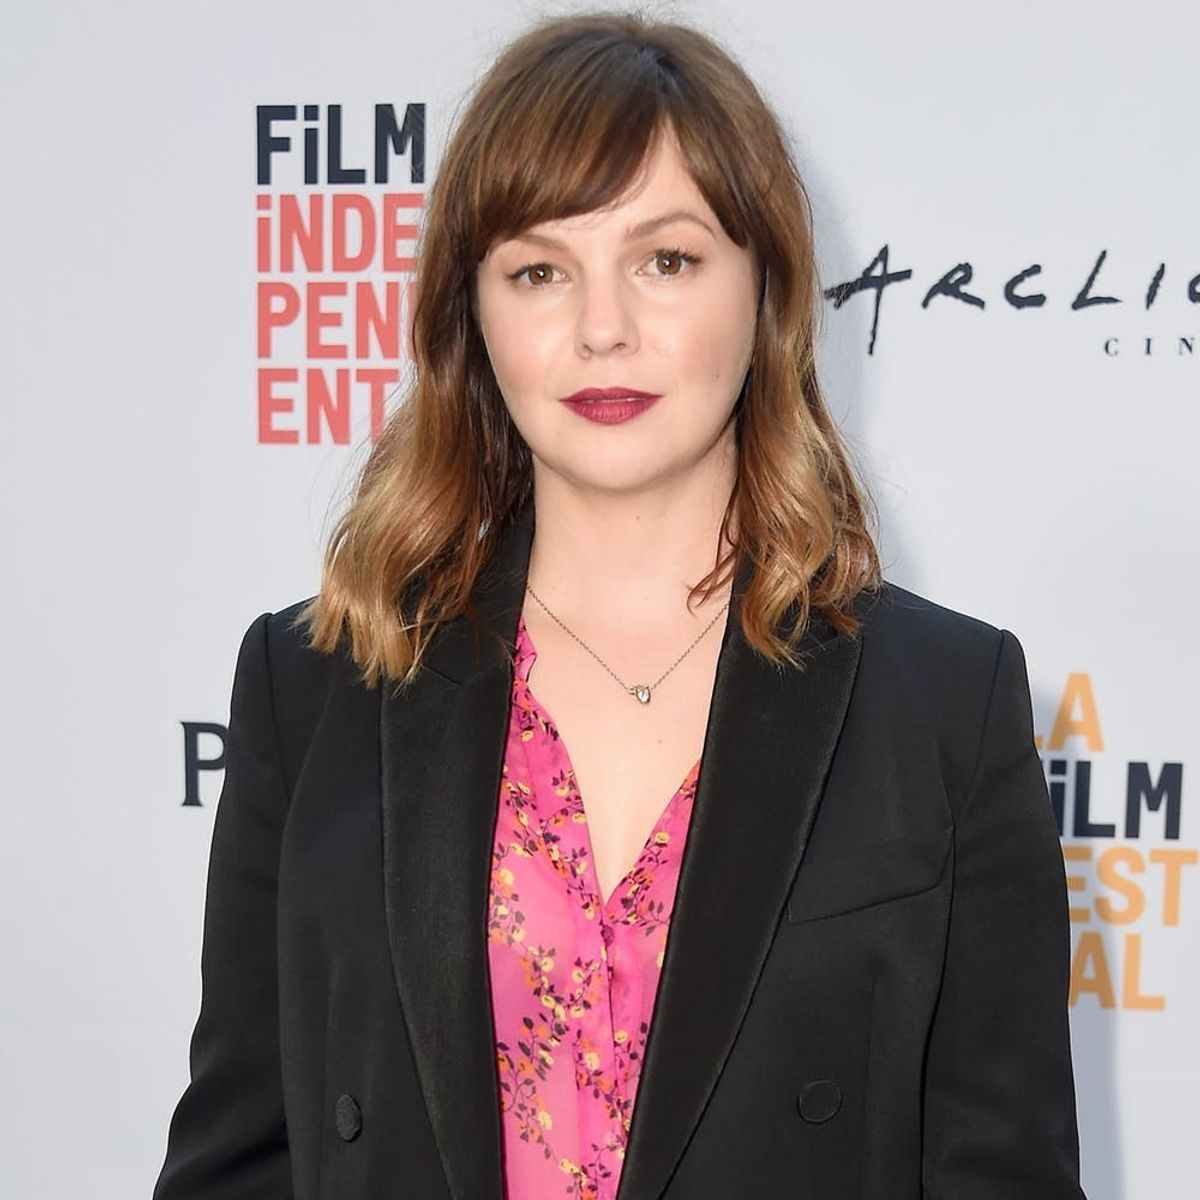 Amber Tamblyn Just Announced the Birth of Her First Babe in the Most Hilarious Way Possible